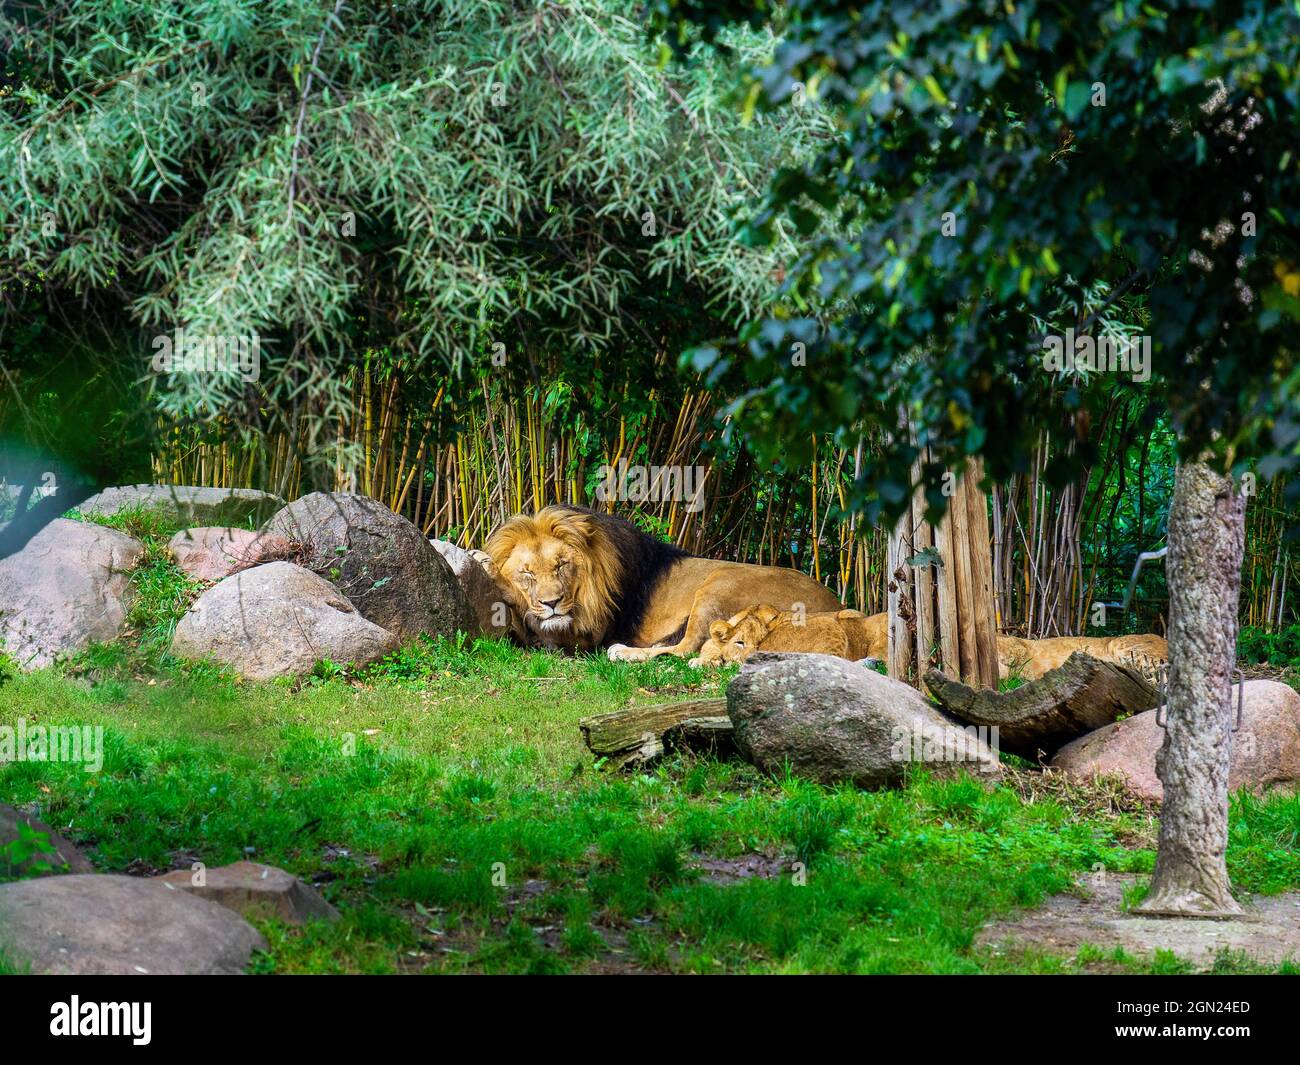 Vicious lion sleeping on the grassy ground in the zoo Stock Photo